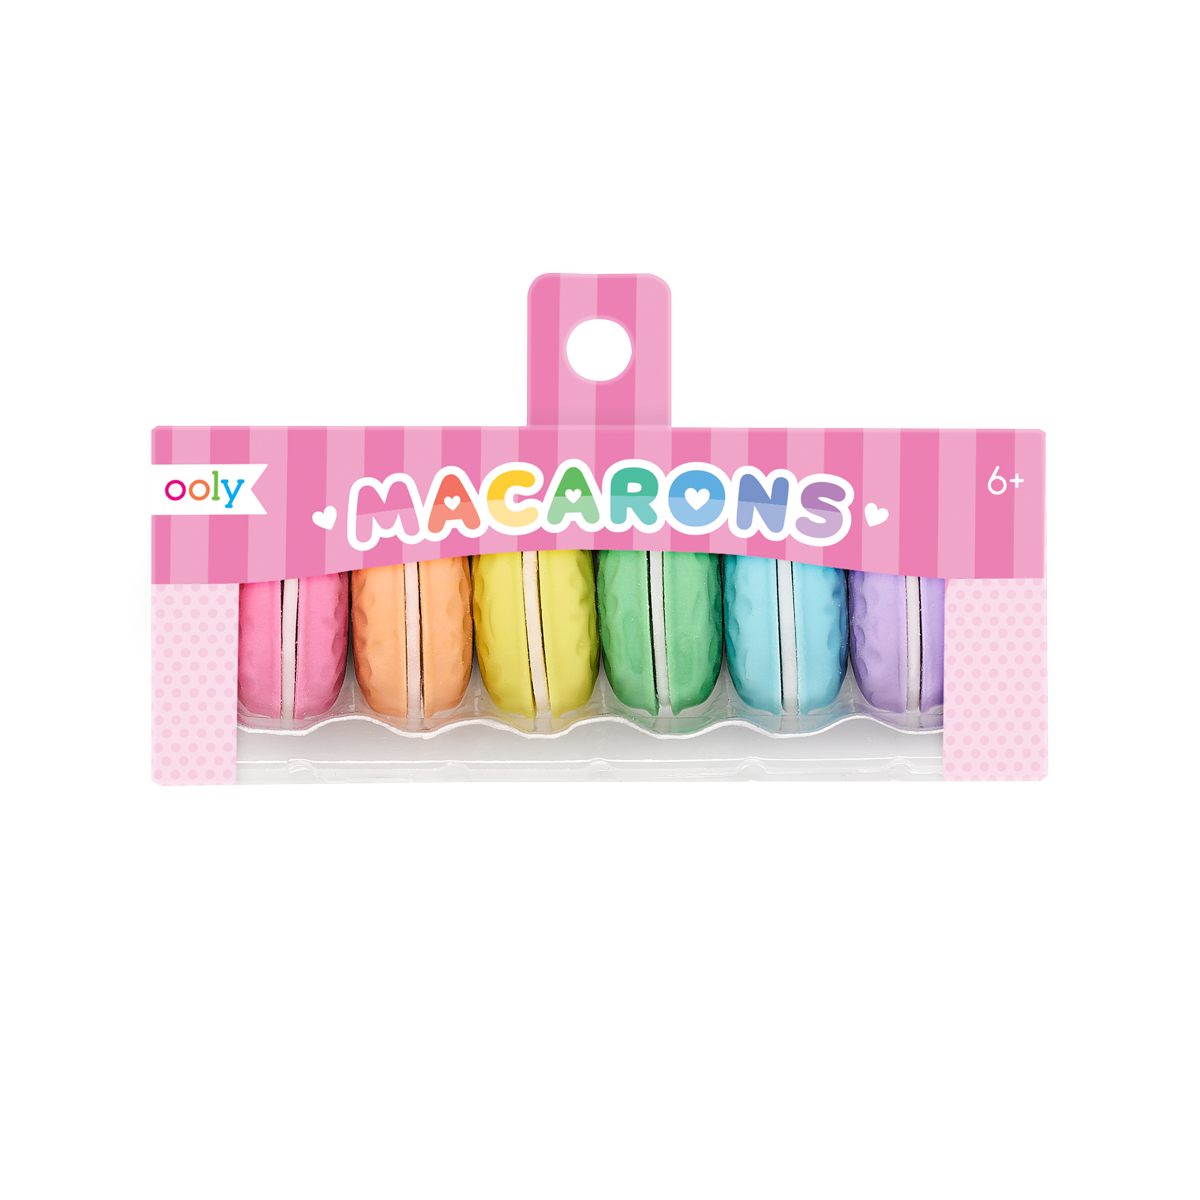 Macarons Vanilla Scented Erasers in a set of 6